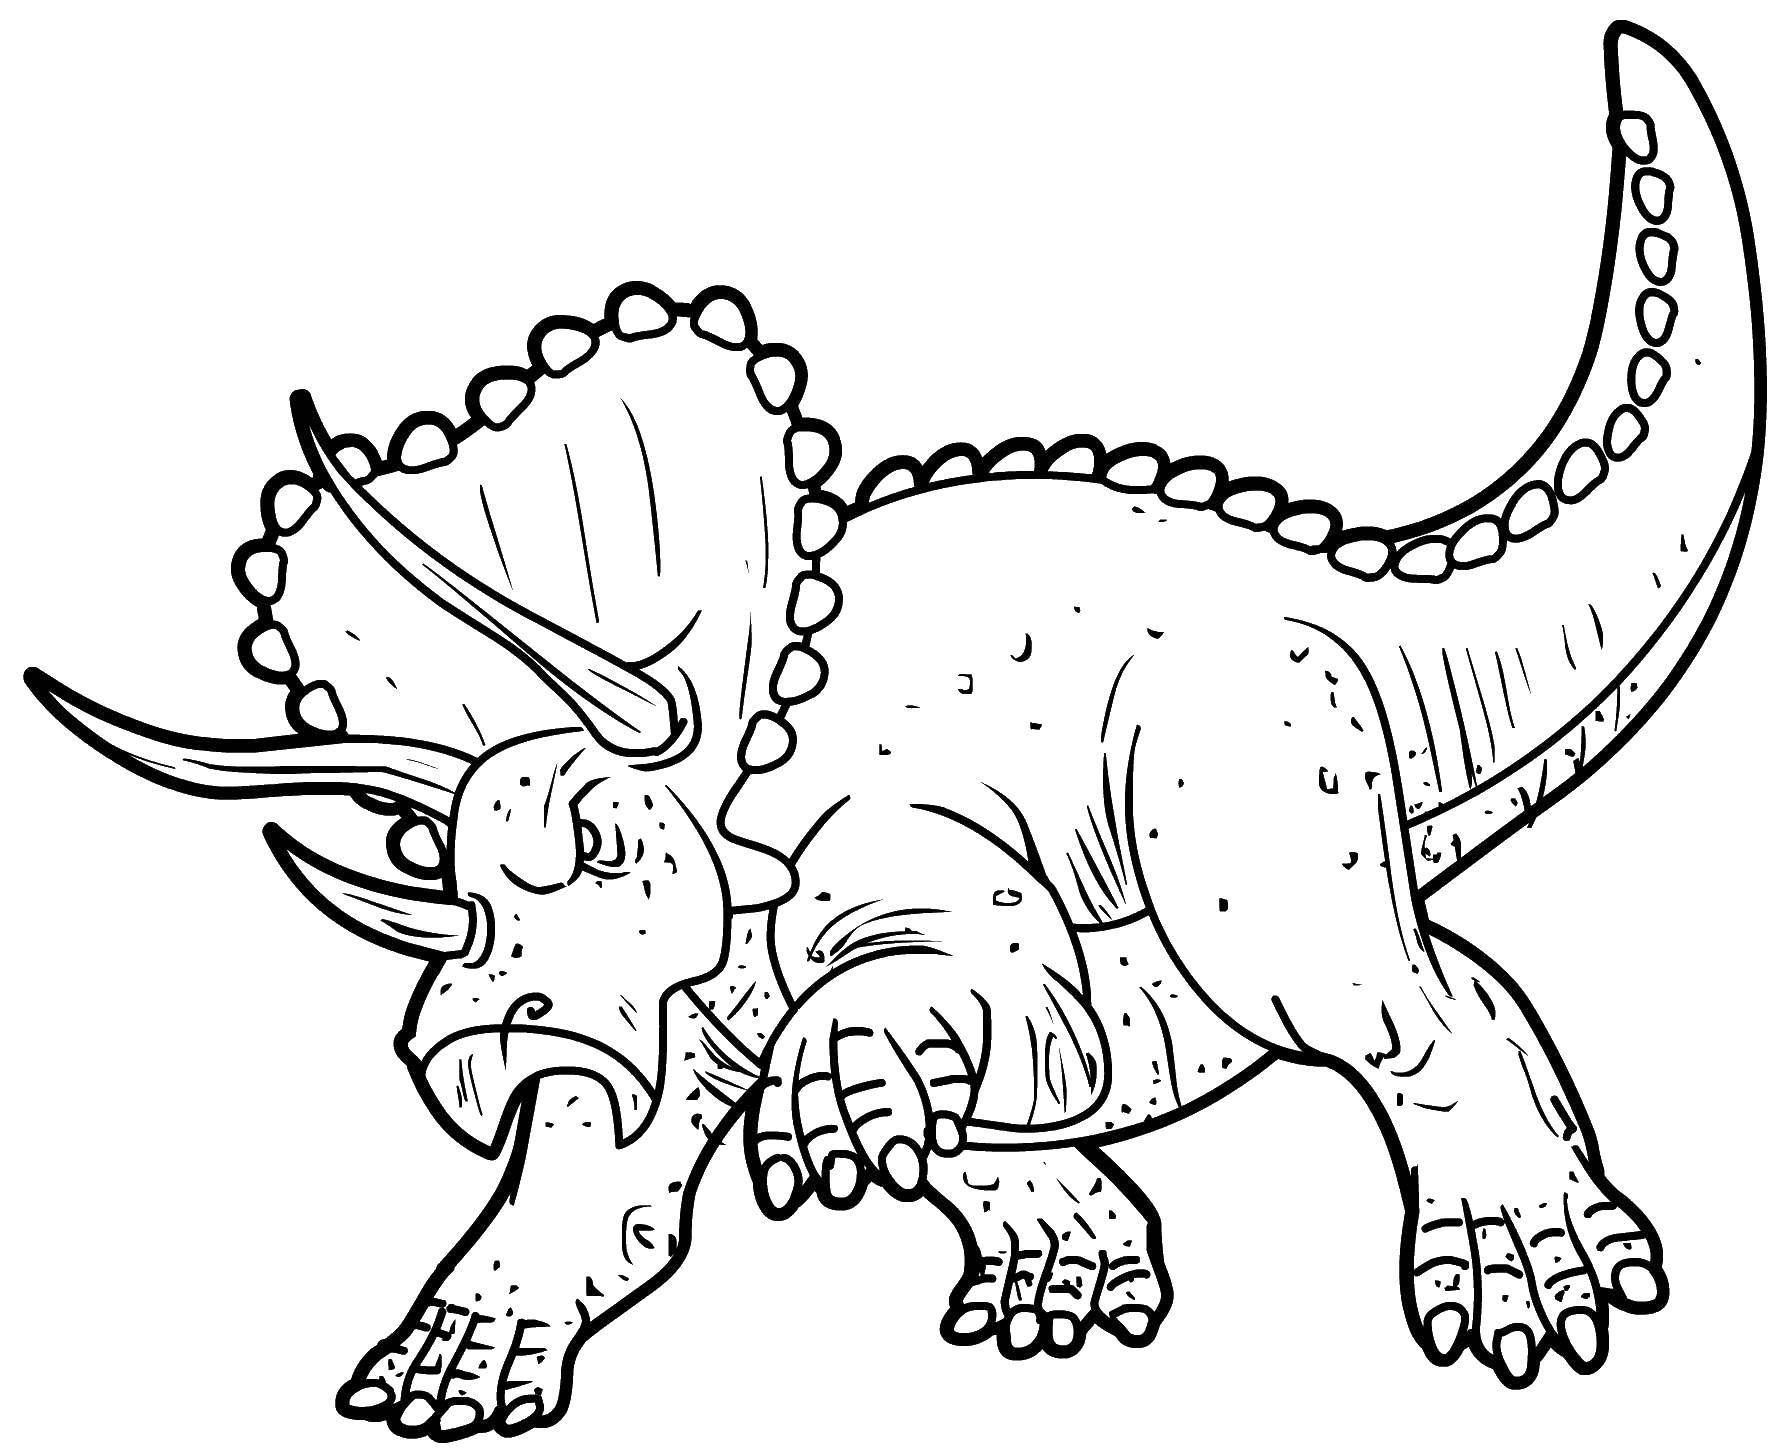 Coloring Triceratops aggression. Category dinosaur. Tags:  Dinosaurs.